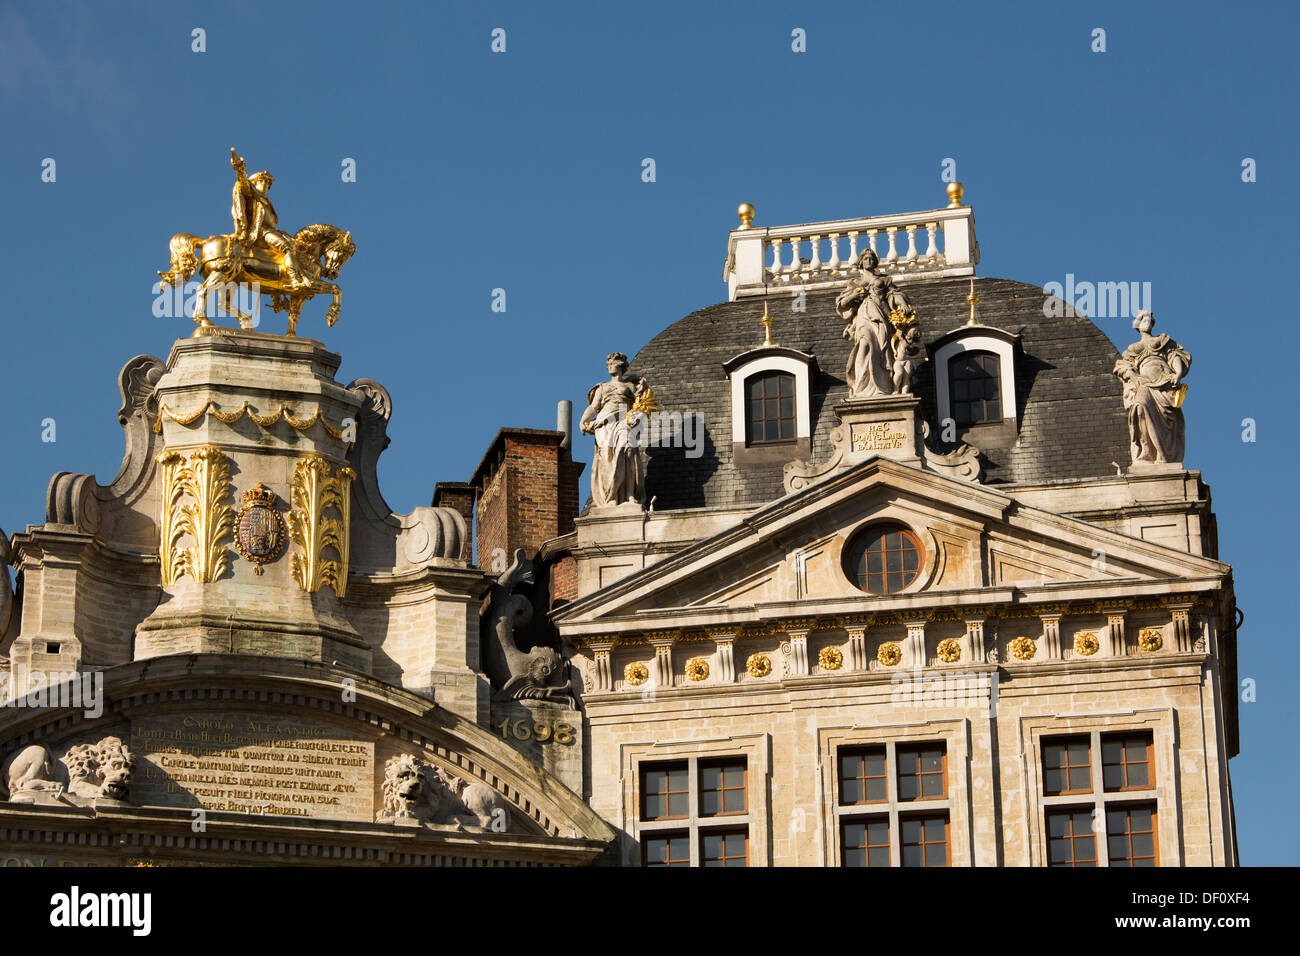 The facades of various guildhouses standing in the Grand Place in Brussels Stock Photo